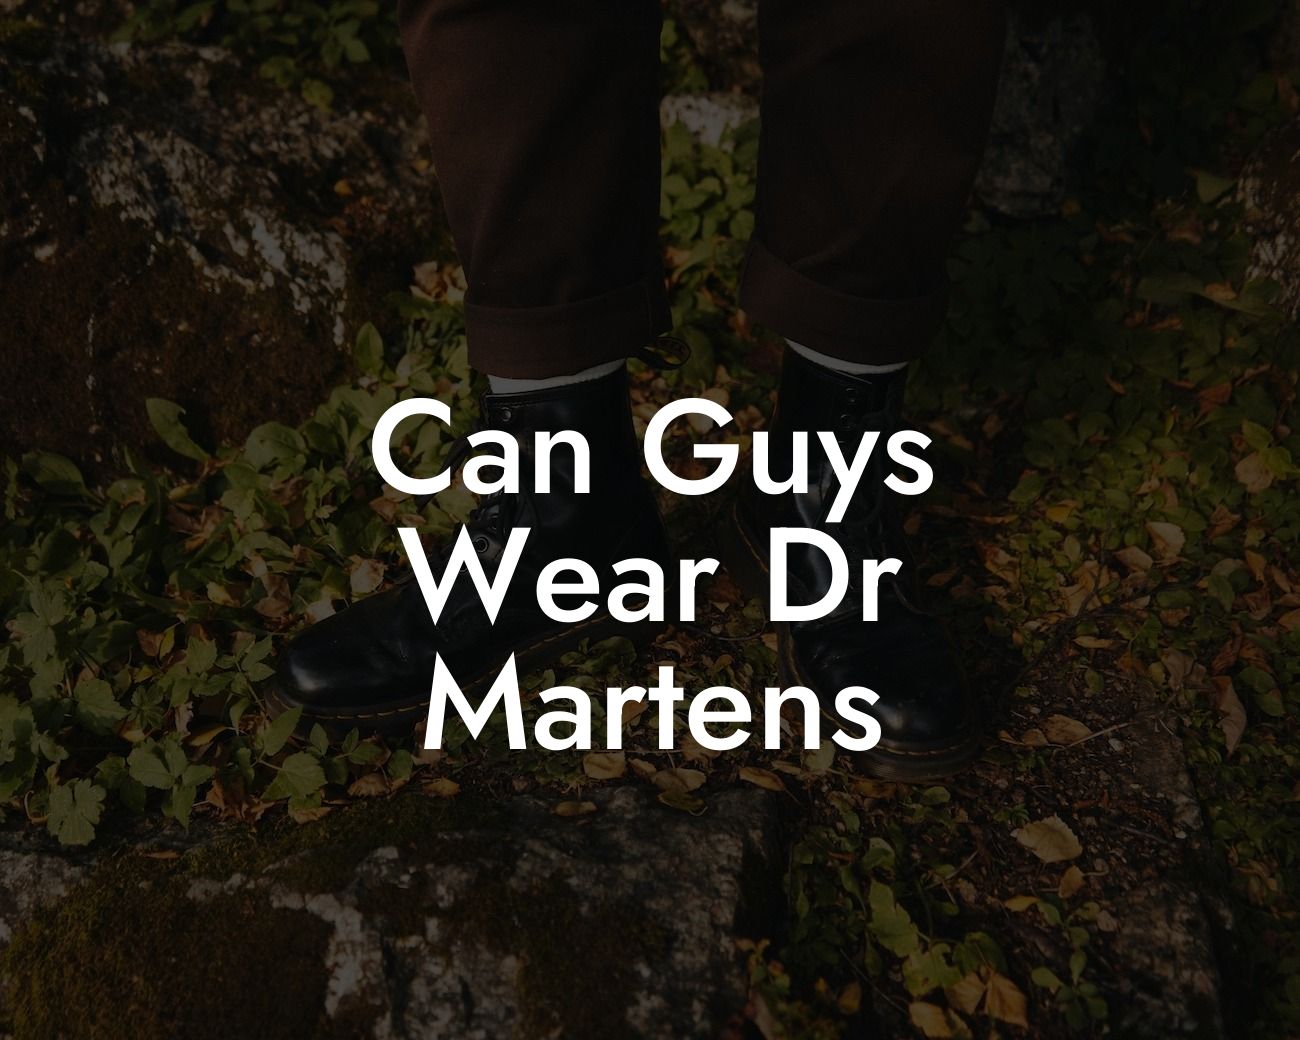 Can Guys Wear Dr Martens